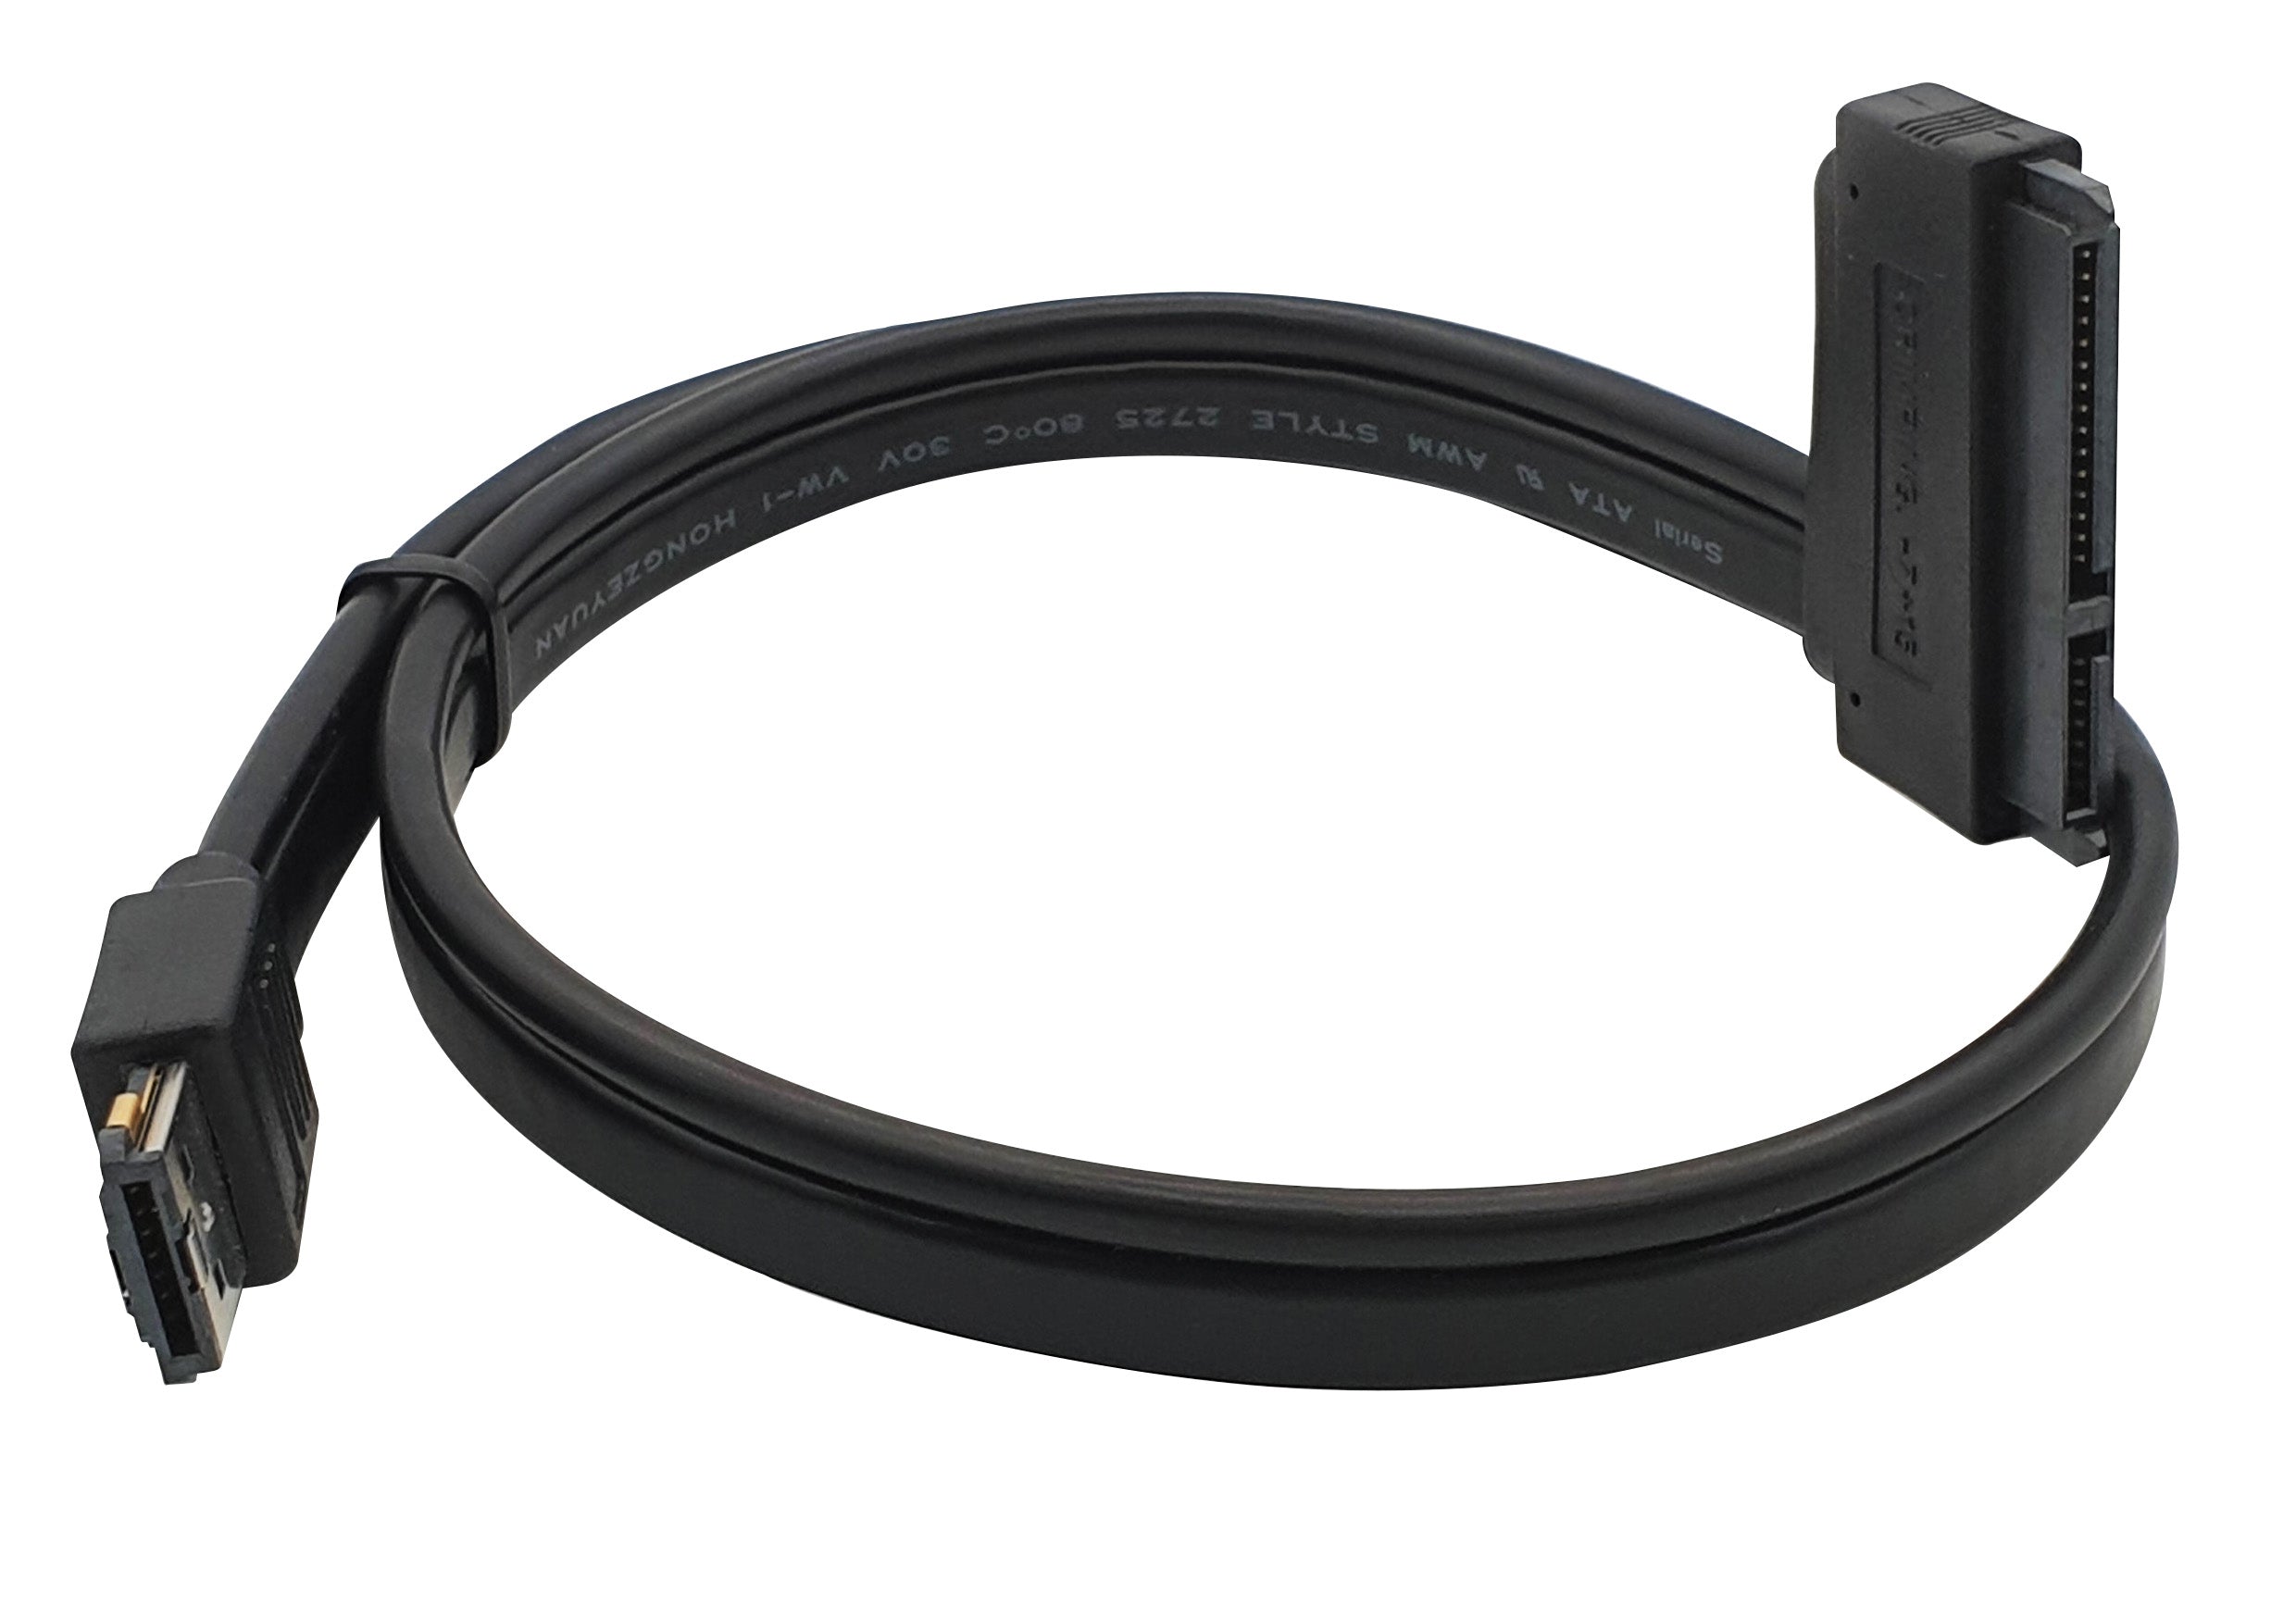 Power eSATA (eSATAp) to SATA Cable for 2.5 and 3.5" HDD/SSD